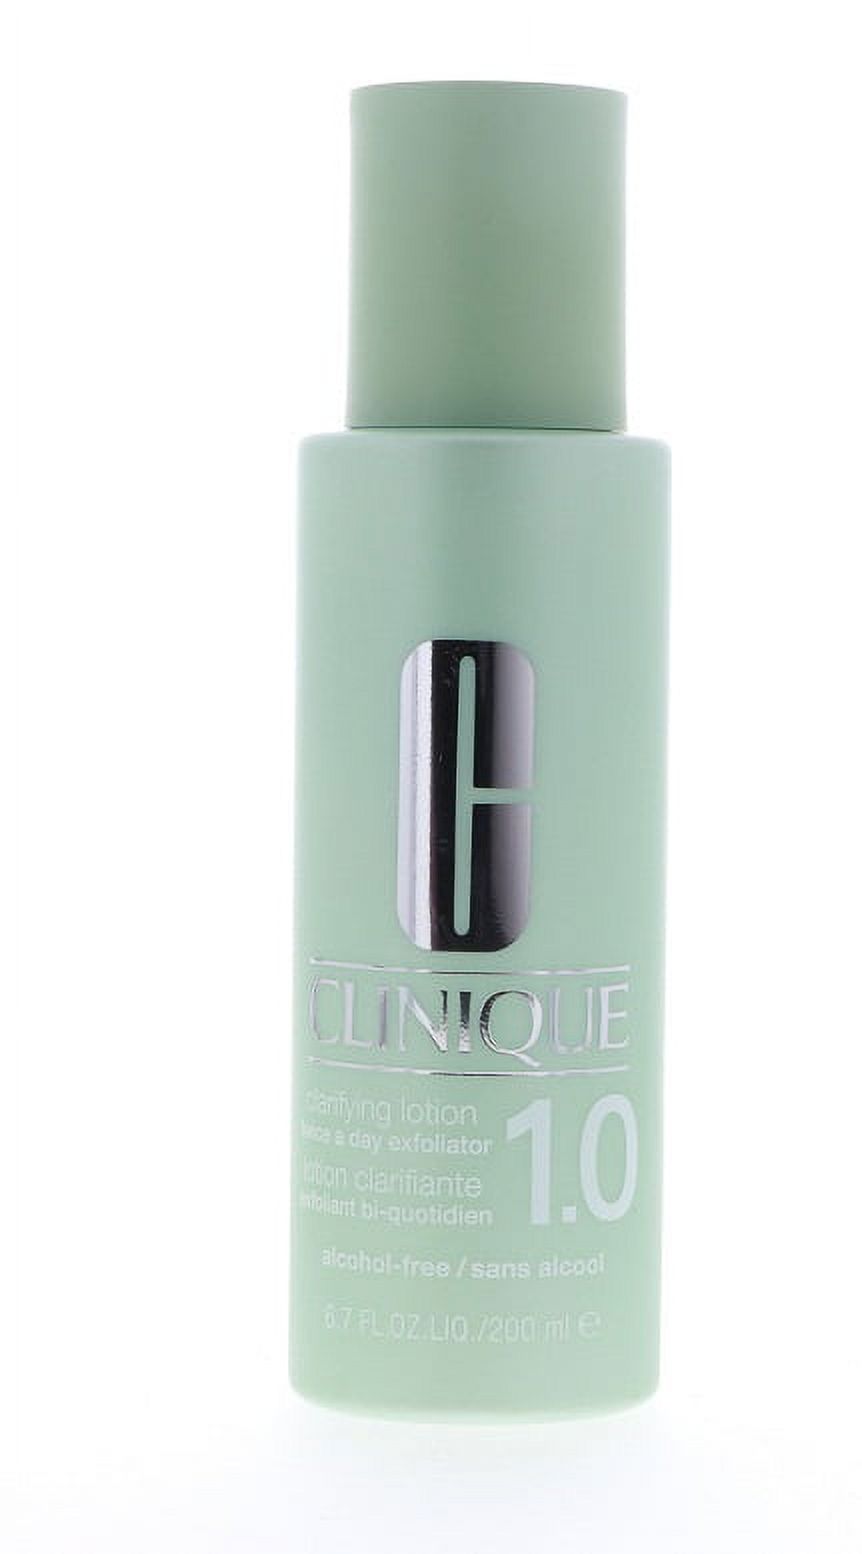 Clinique Clarifying Lotion 1 6.70 oz (Pack of 2) - image 1 of 2